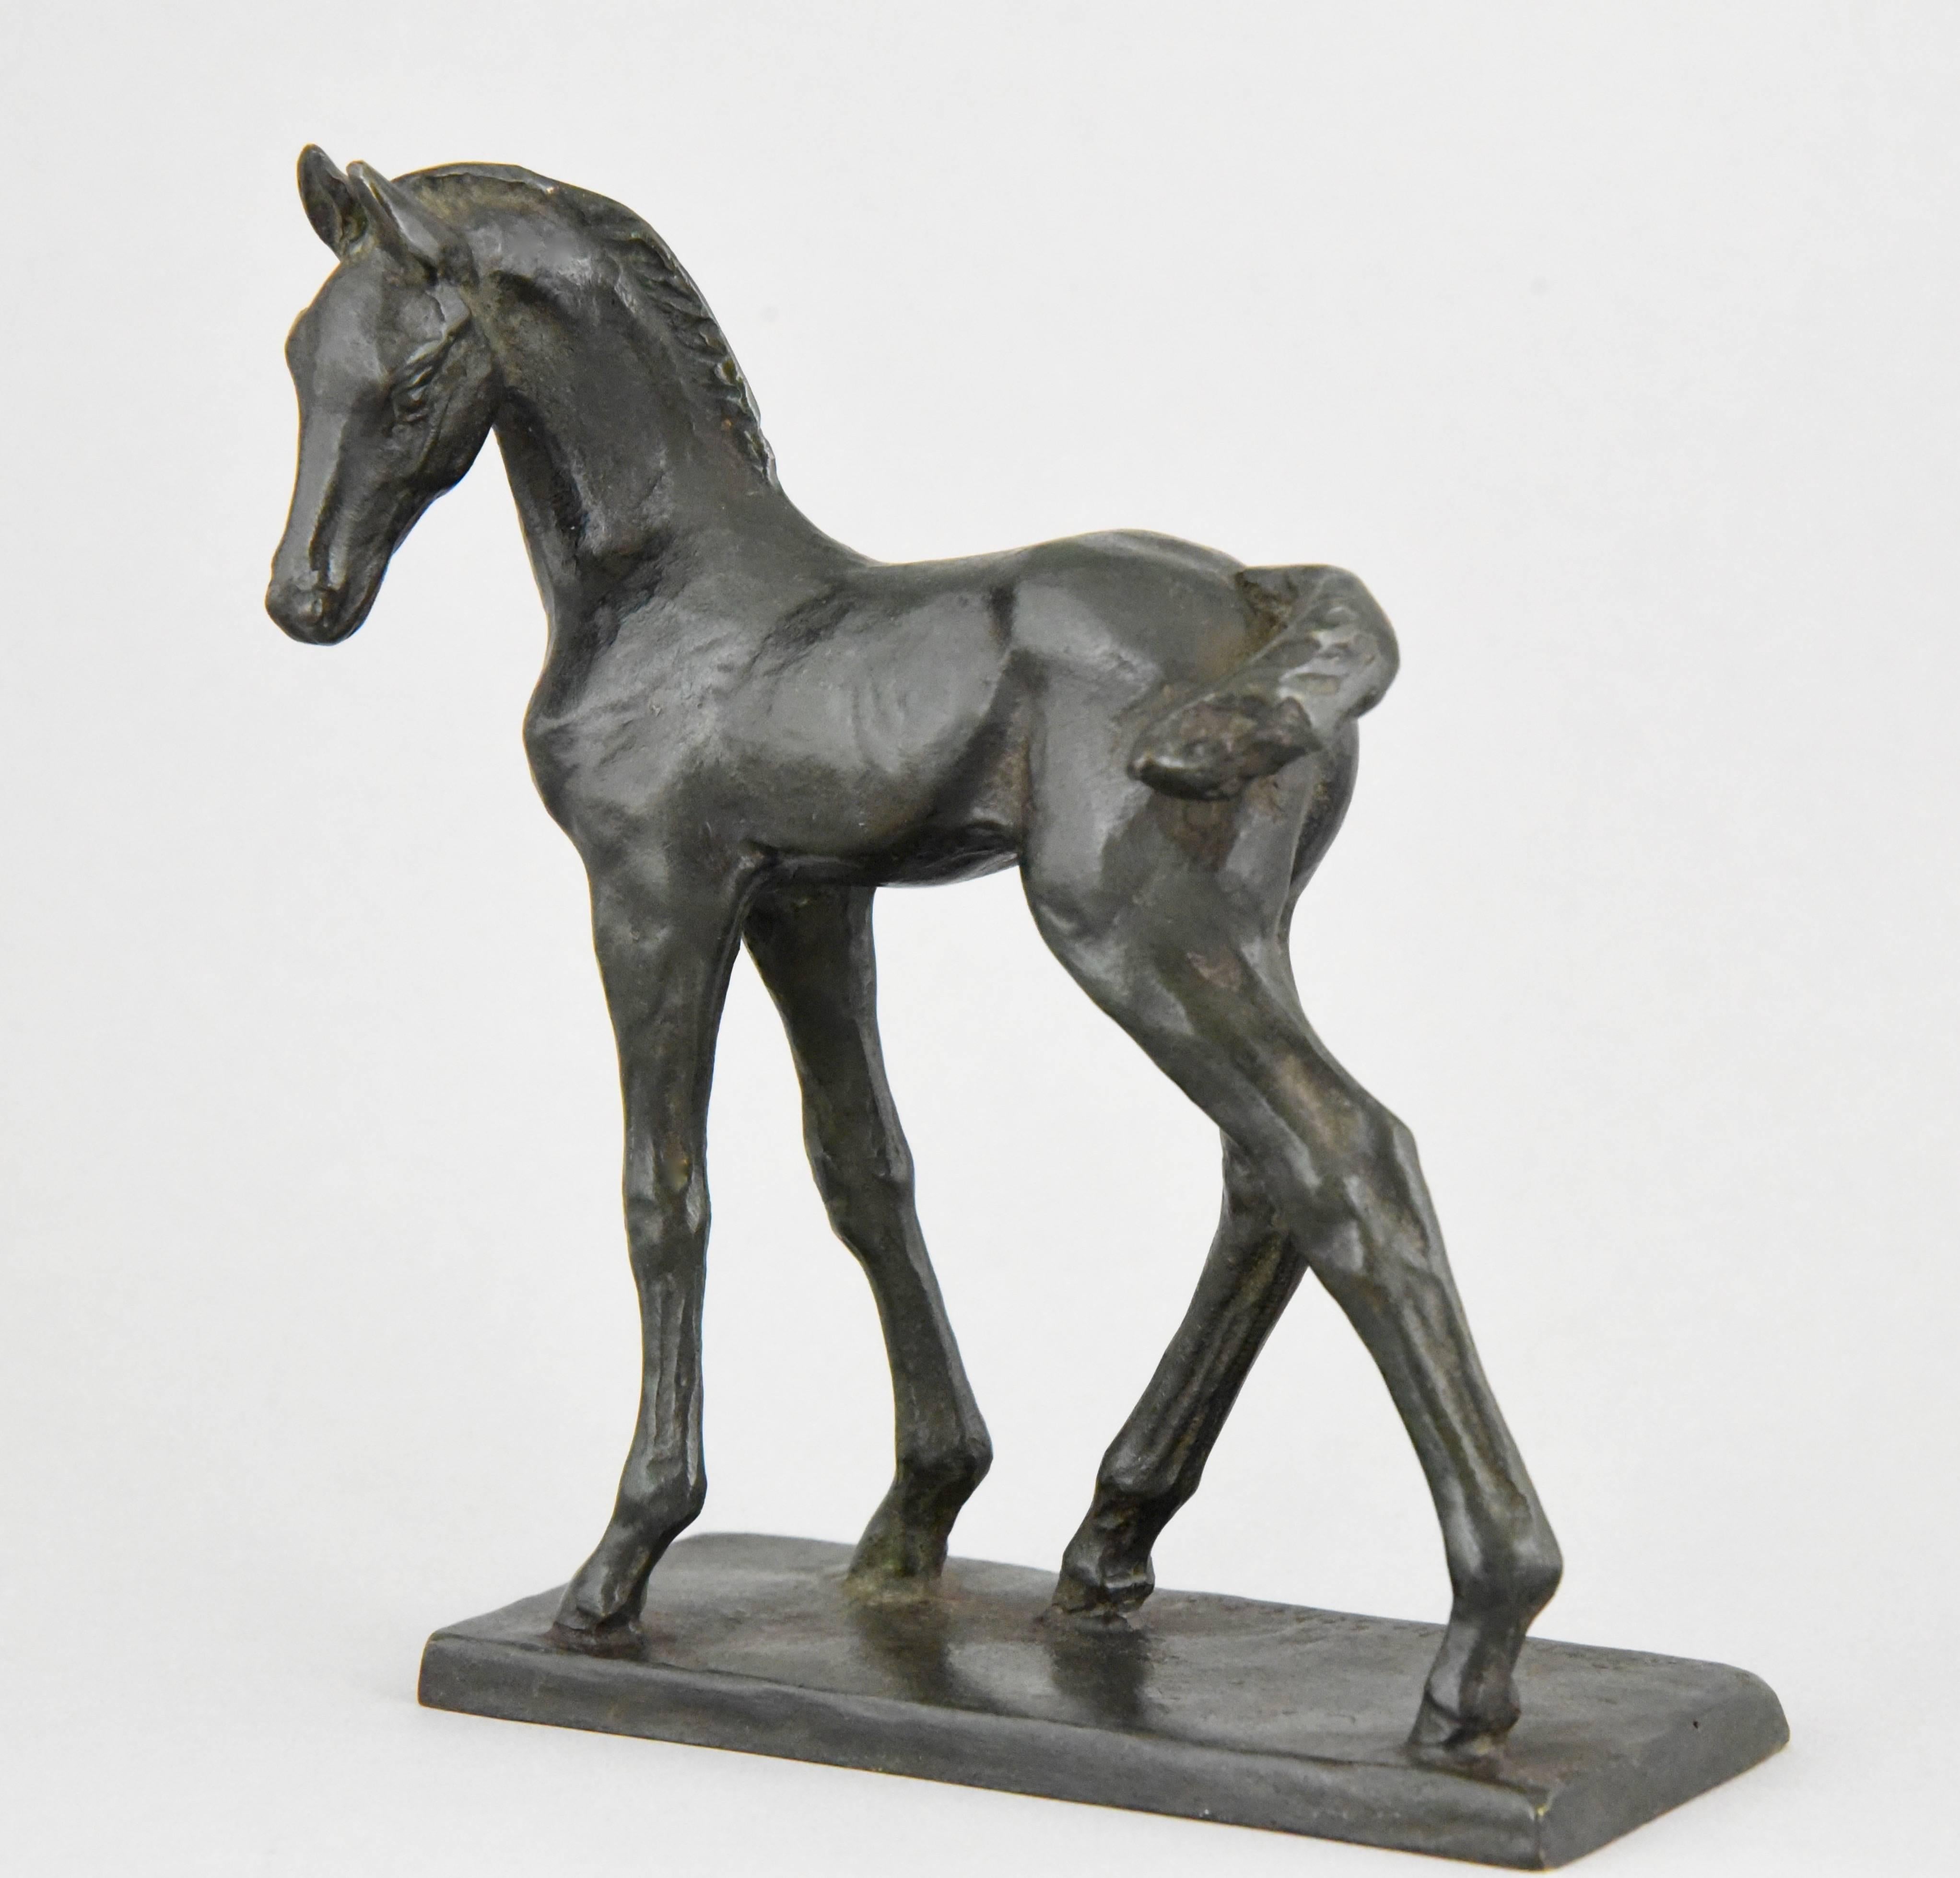 Lovely Art Deco bronze sculpture of a foal by the German artist Leonore Rendlen Schneider. 

Artist or Maker: Leonore Rendlen Schneider
Signature or Marks: L. Rendlen Schneider. Kraas Giesserei Berlin, founders’ signature.
Style: Art Deco
Date: